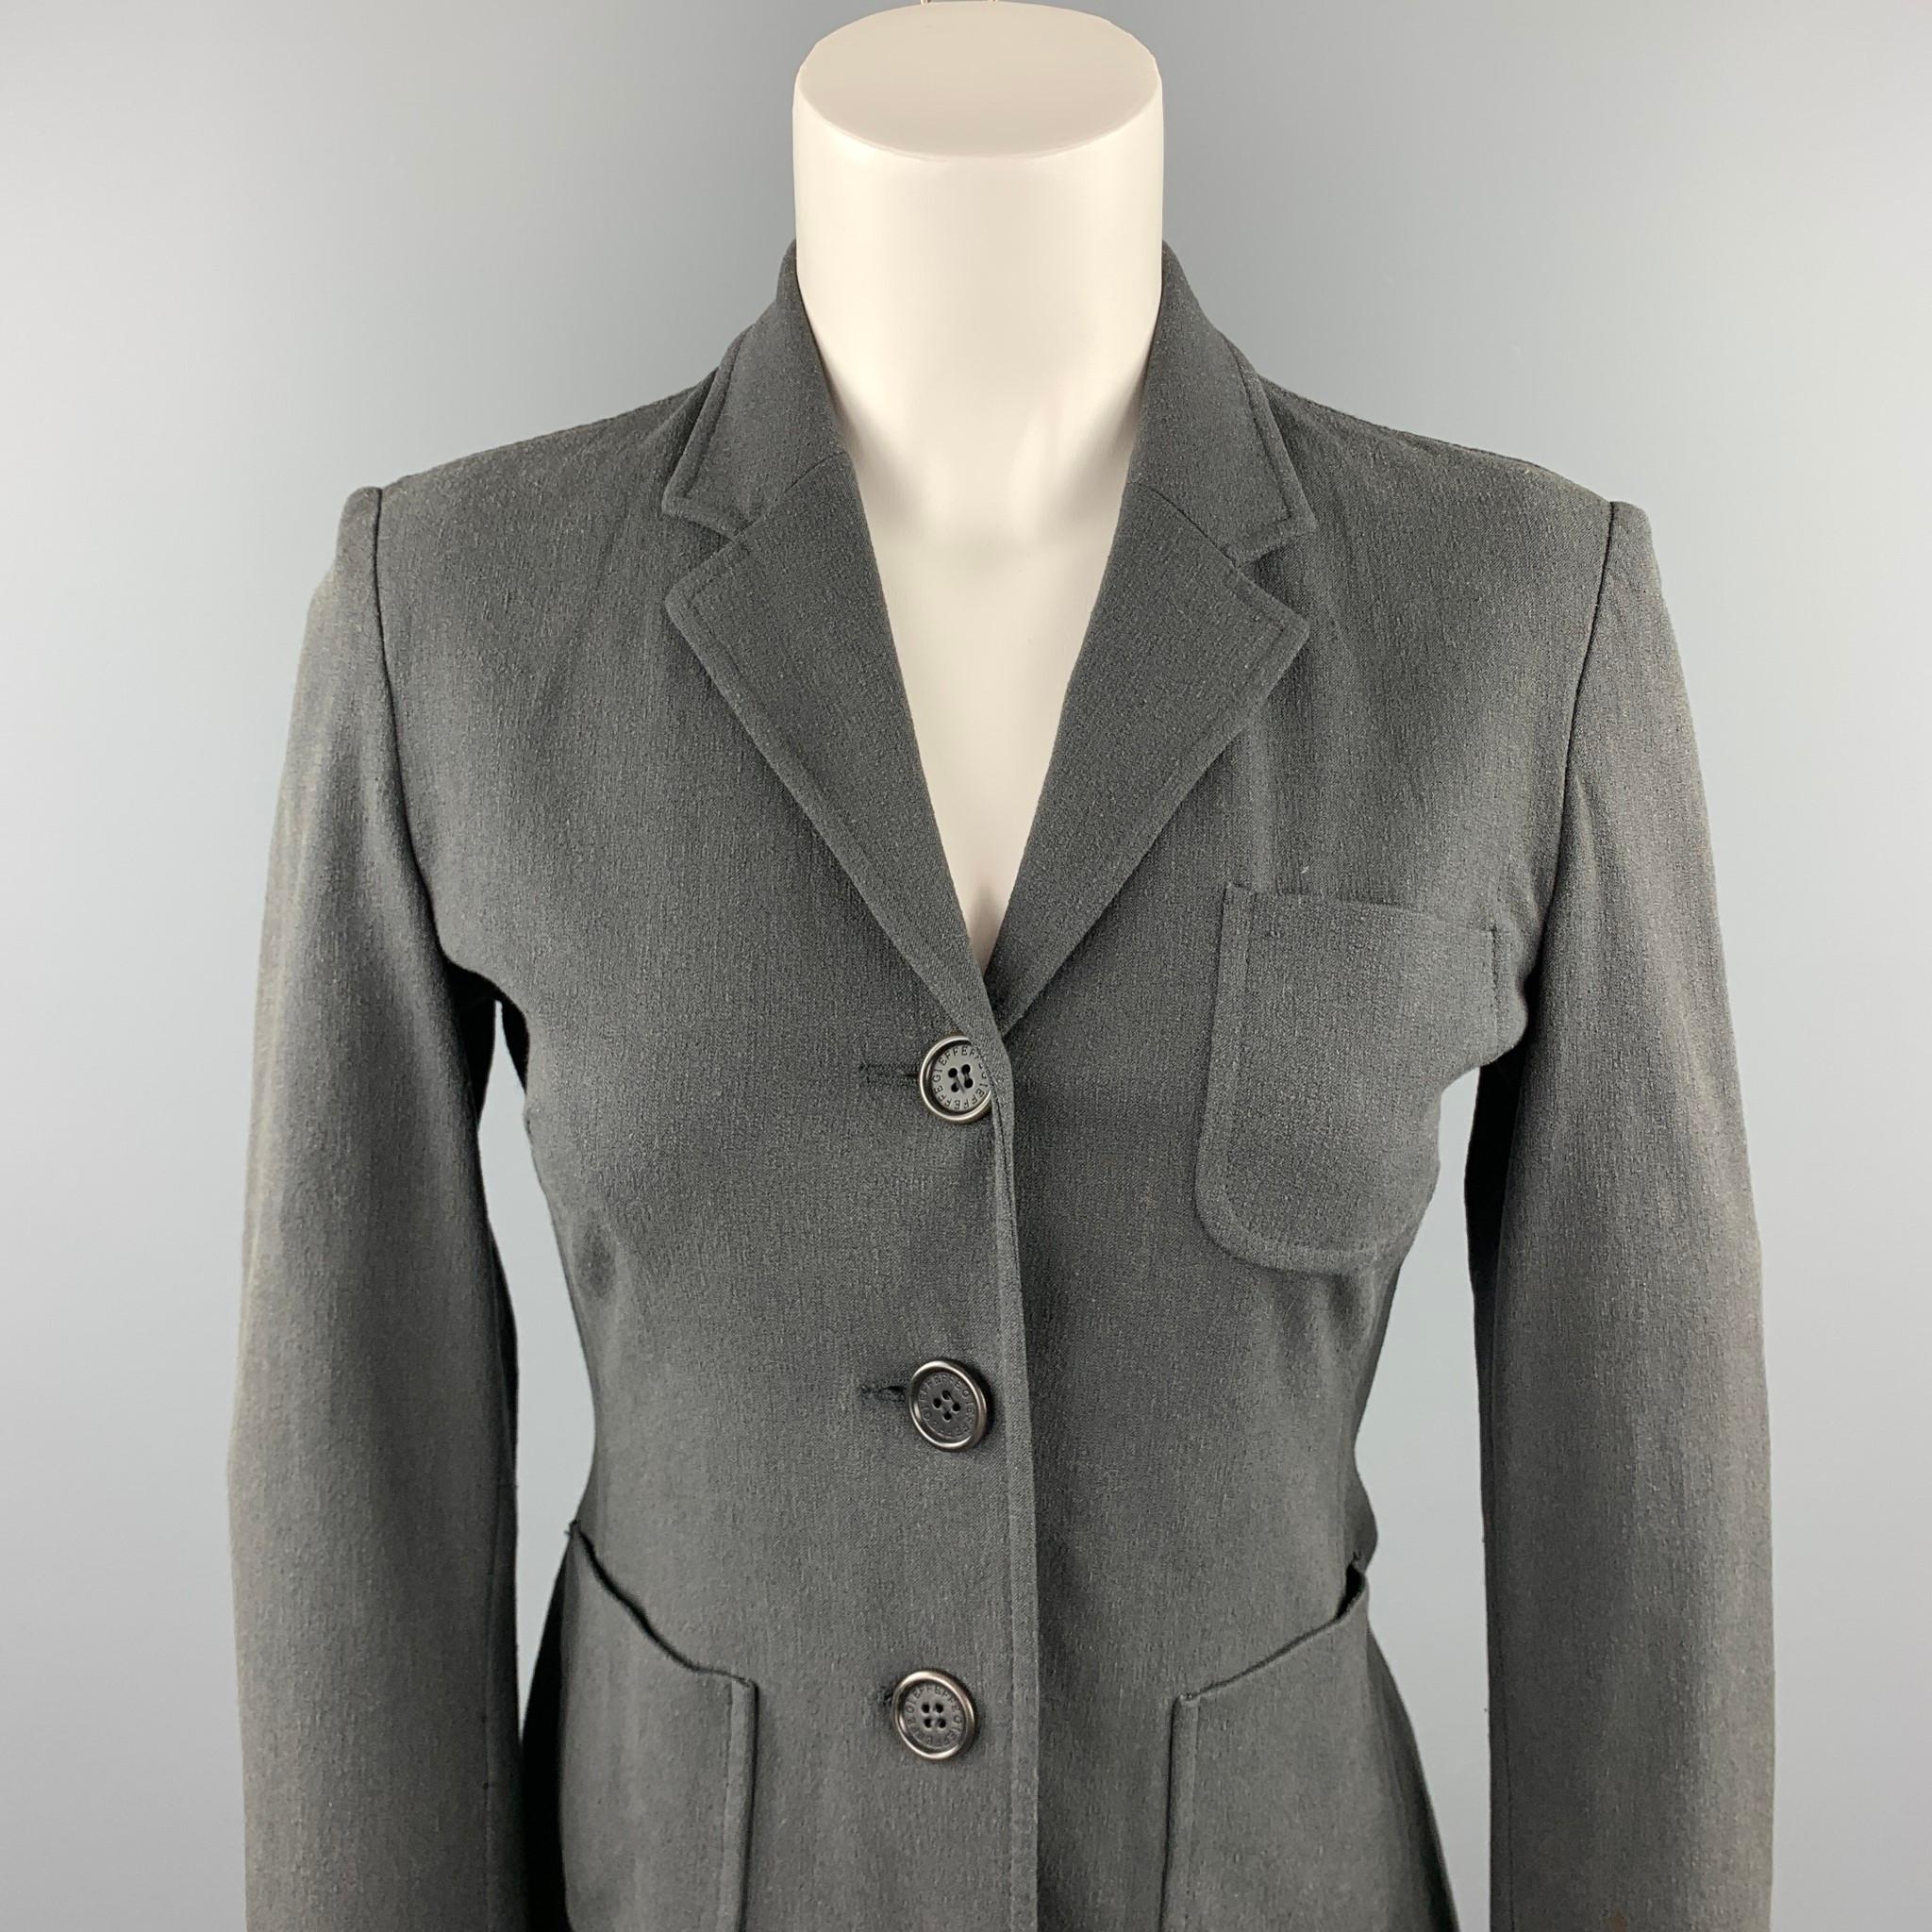 GIANFRANCO FERRE blazer comes in a slate material featuring a notch lapel, patch pockets, and a buttoned closure. Made in Italy.

Very Good Pre-Owned Condition.
Marked: US 6

Measurements:

Shoulder: 15 in. 
Bust: 34 in. 
Sleeve: 22 in. 
Length: 23